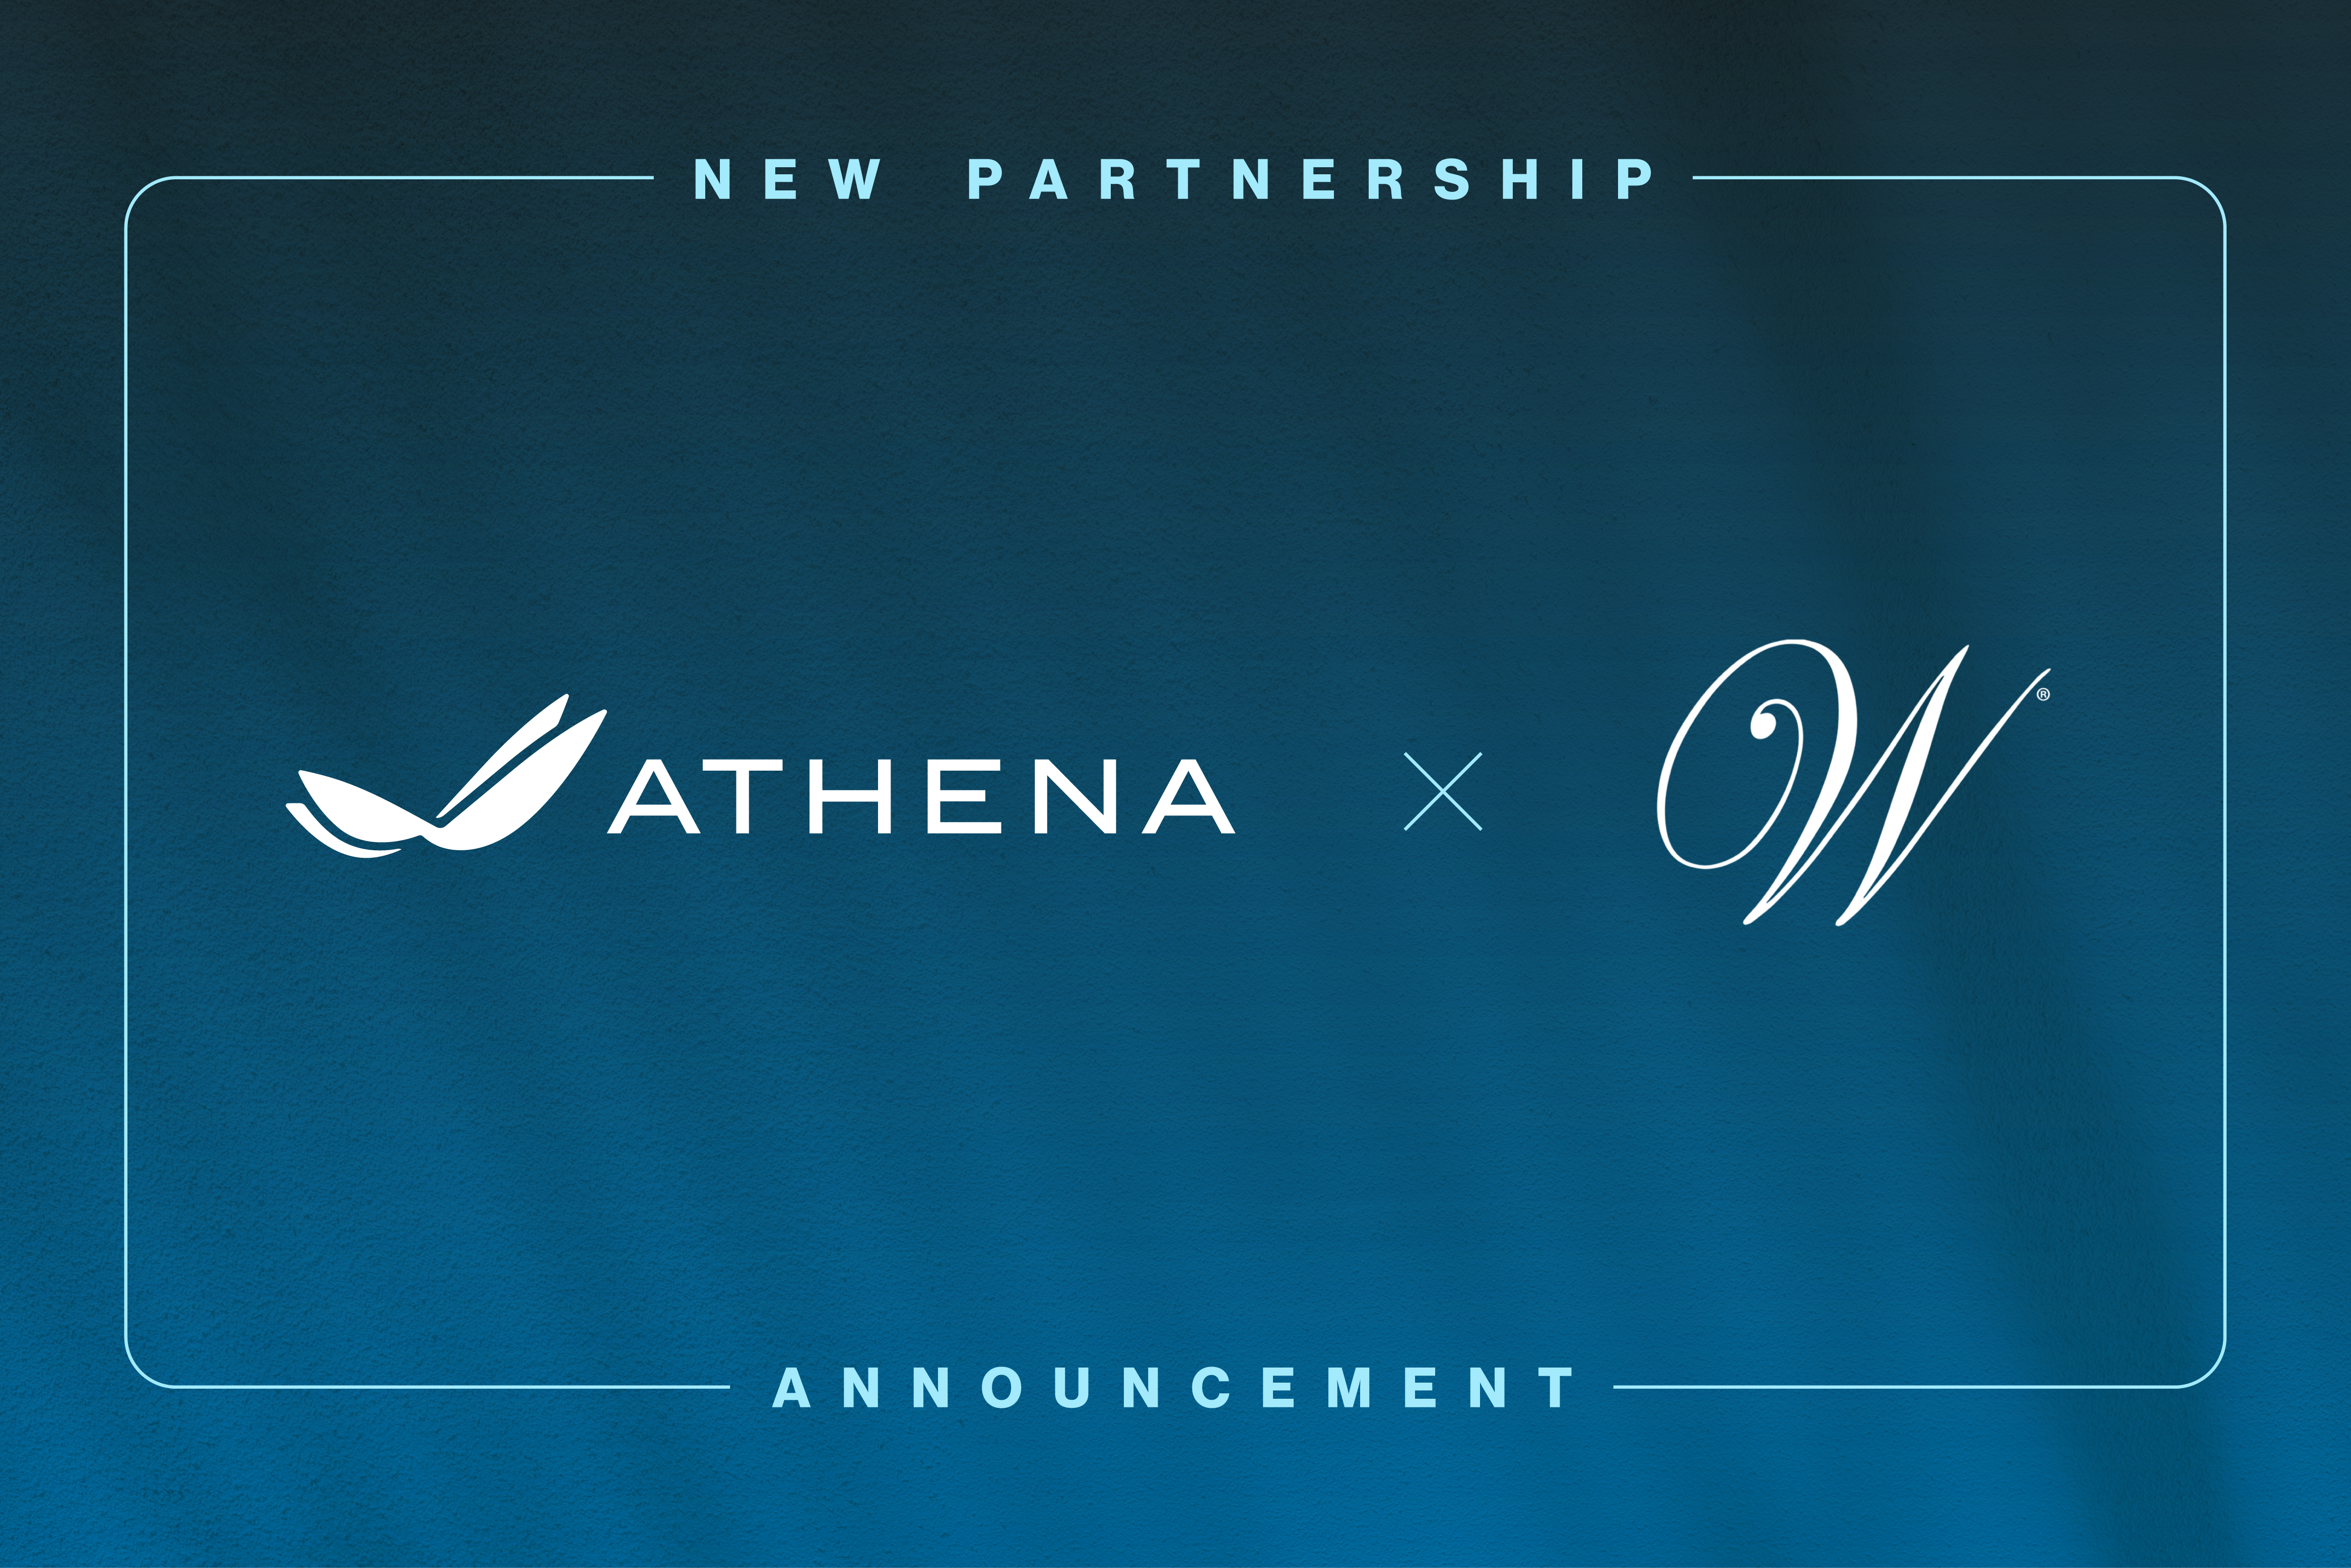 Athena Teams Up with Women to Watch for New Partnership